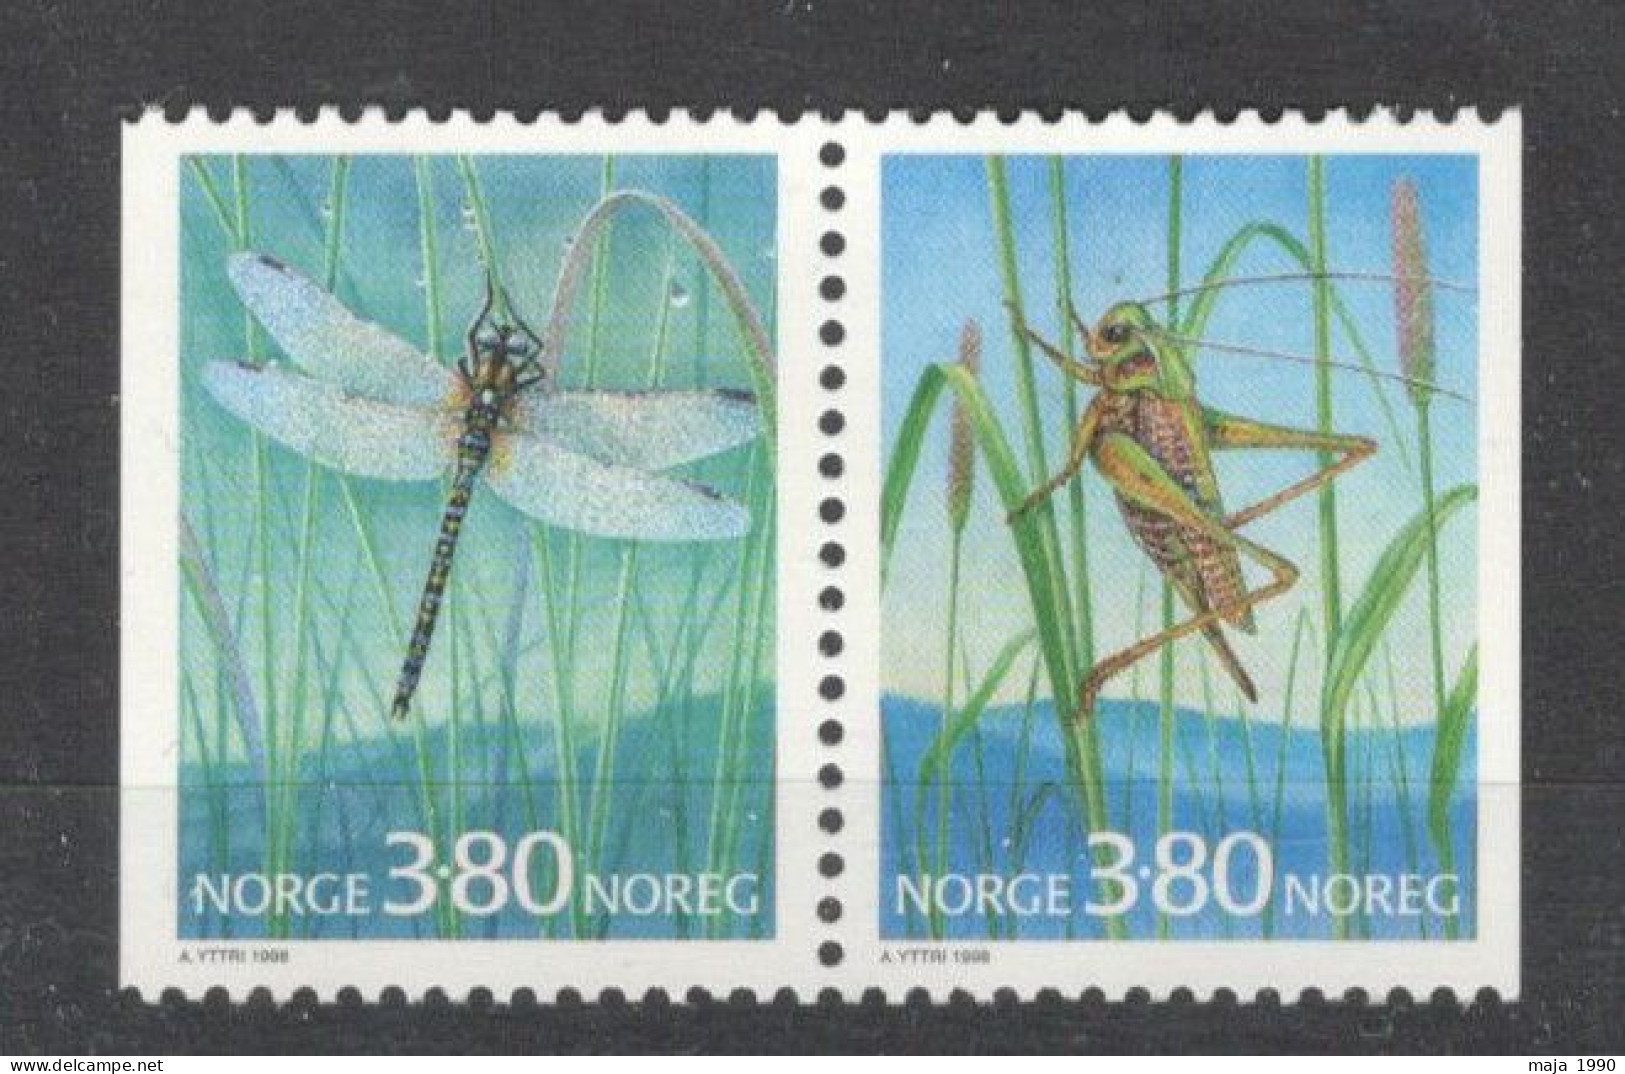 NORWAY - MNH PAIR - FAUNA - INSECTS - Mi.No. 1275/76 - 1998. - Neufs